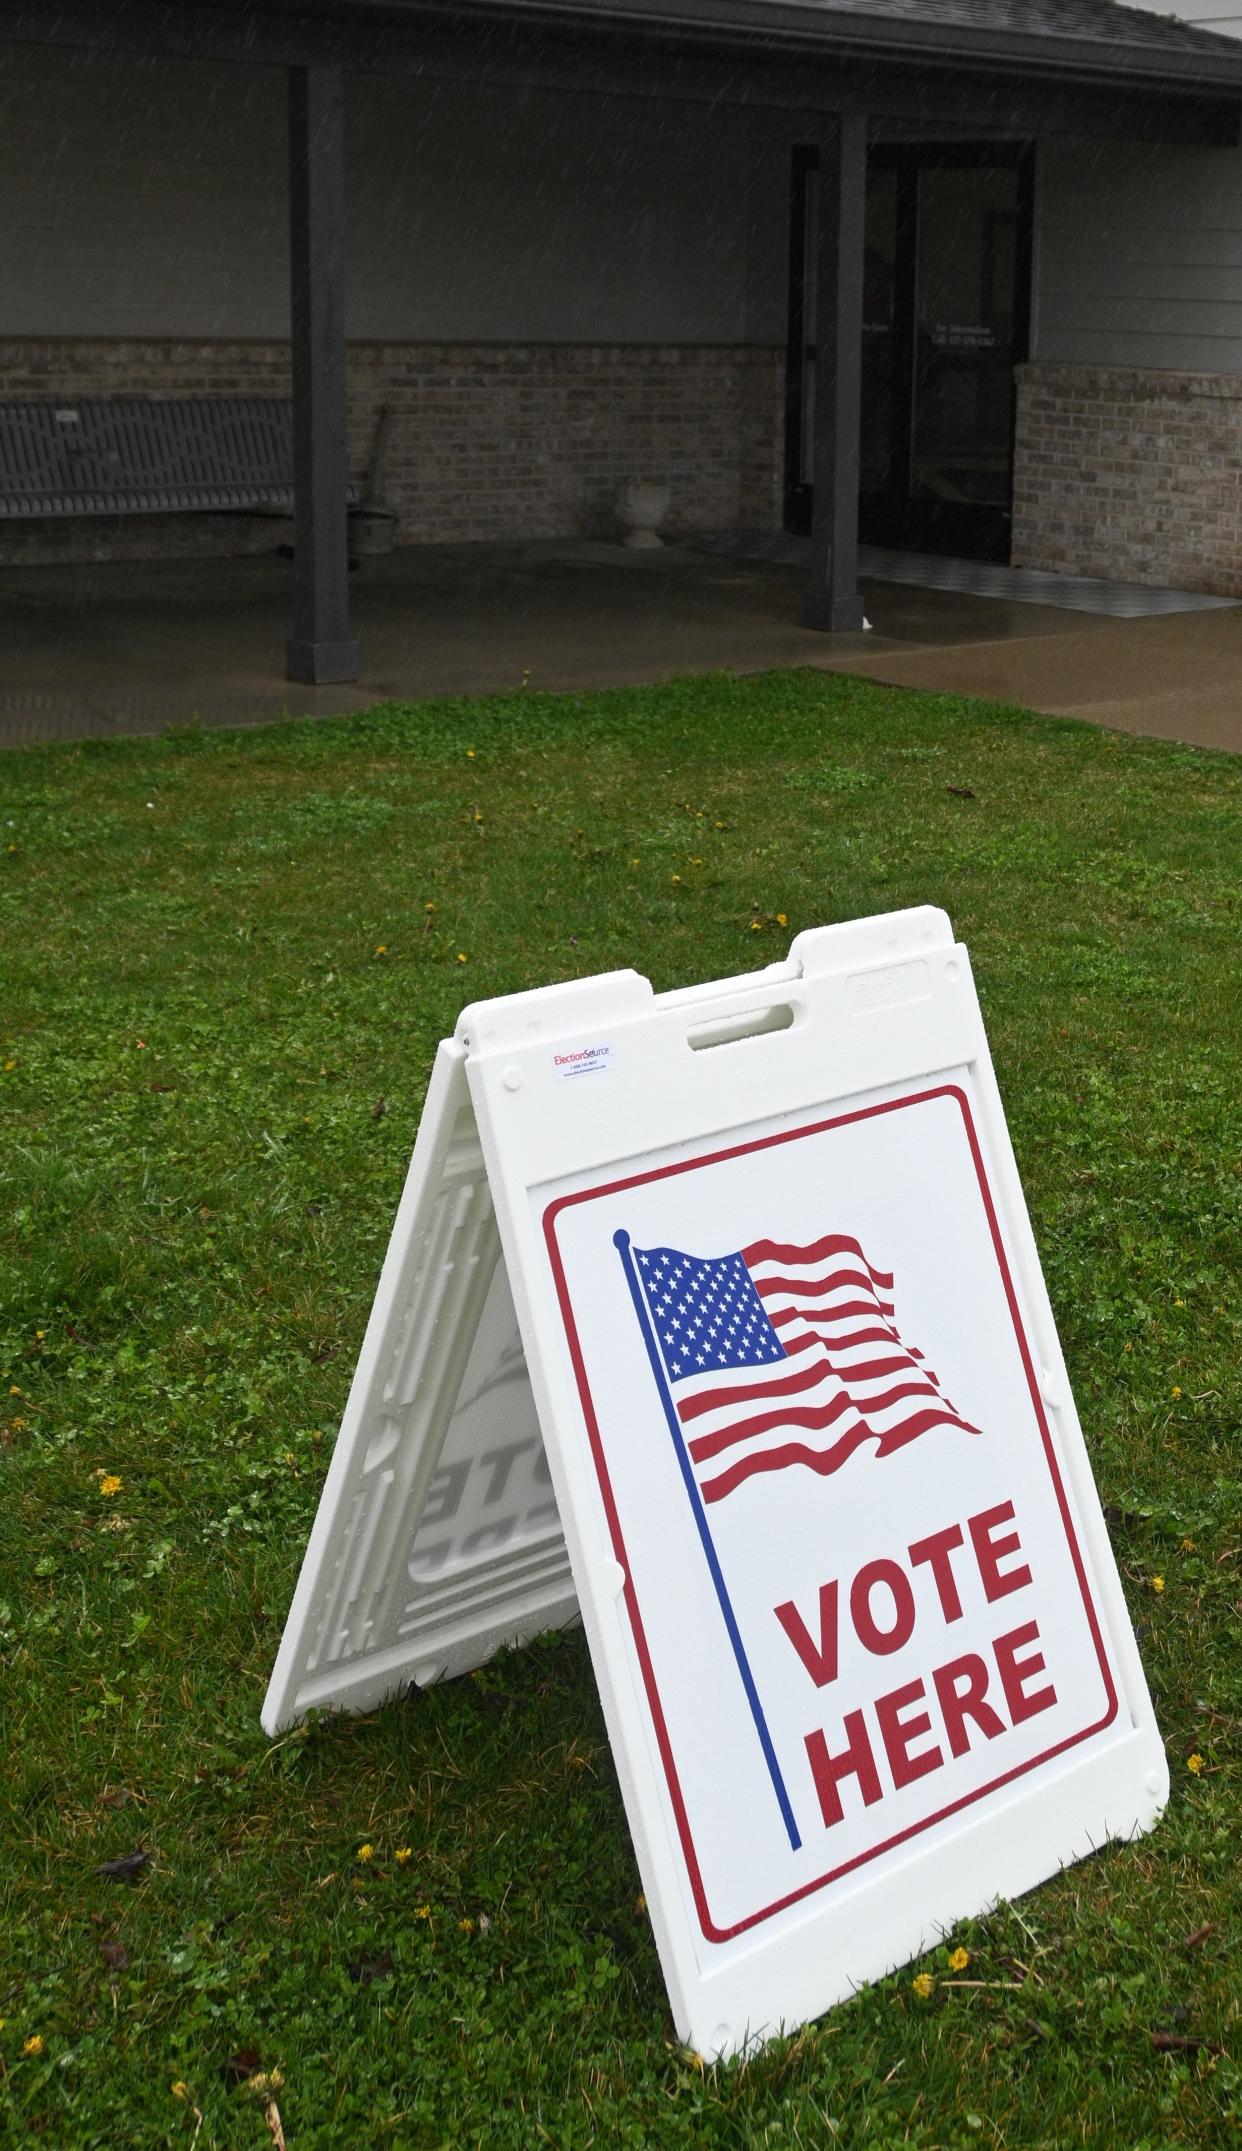 The primary election is set for Aug. 6 with the general election Nov. 5.